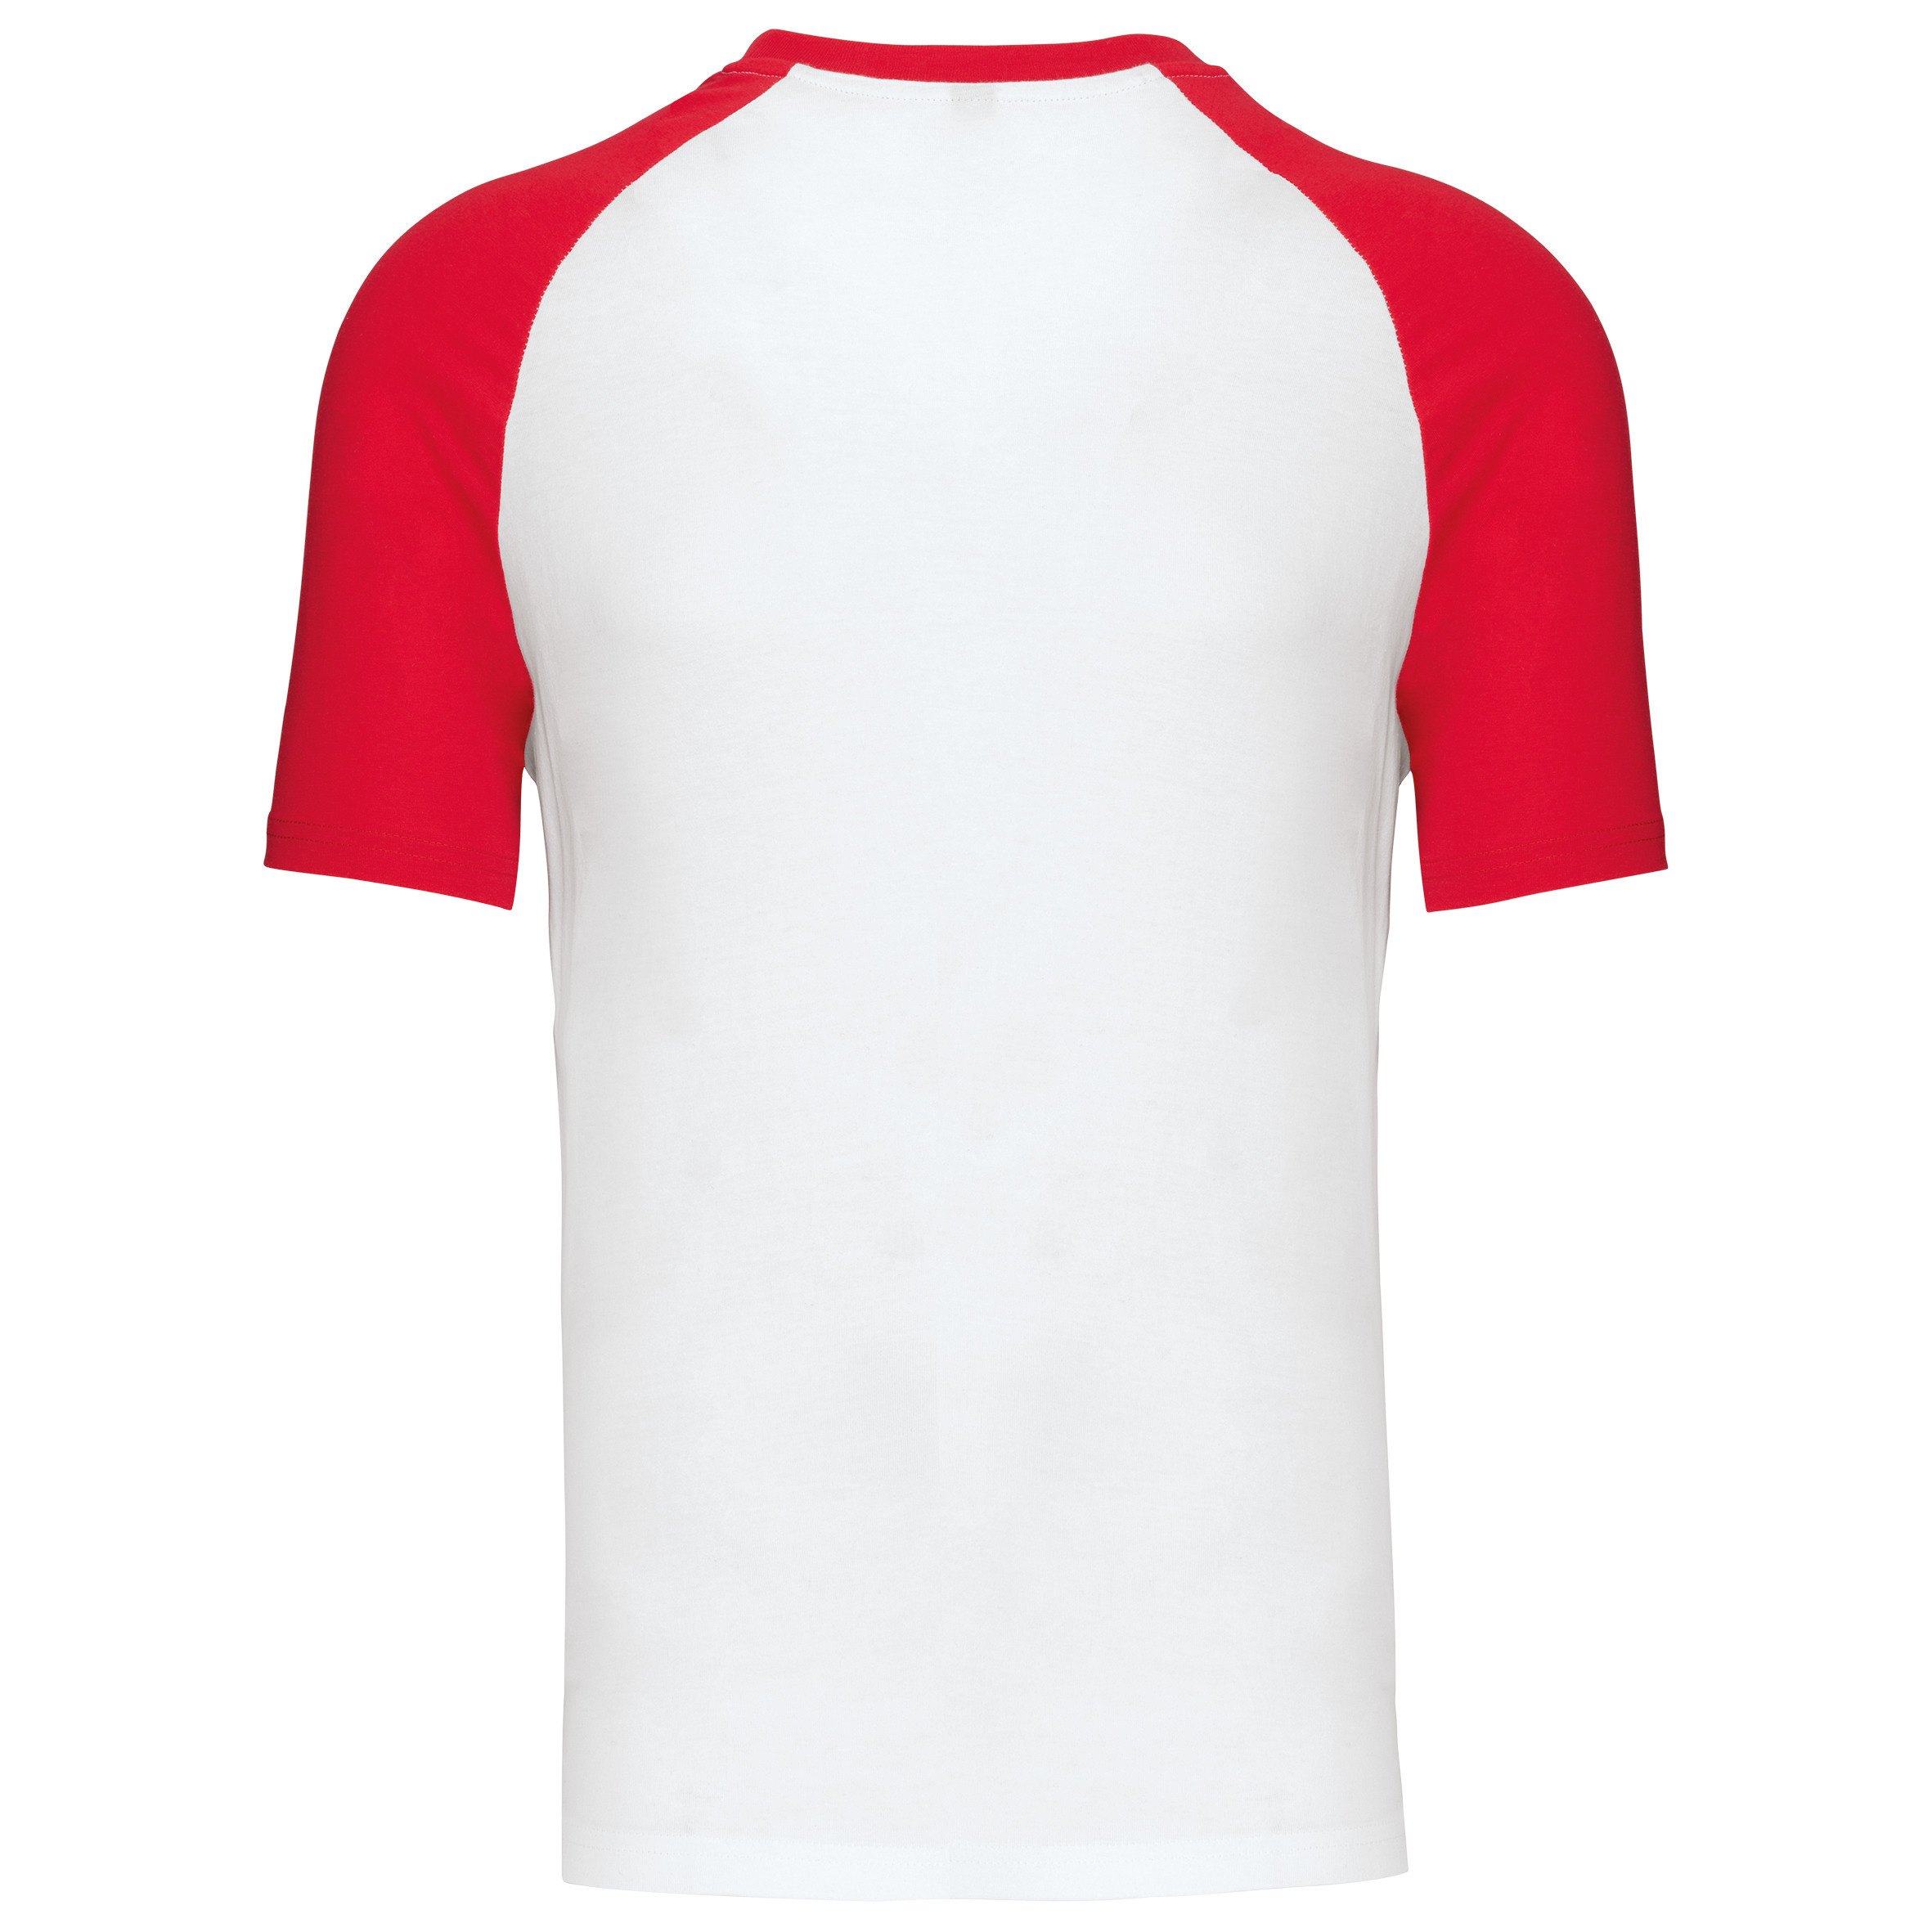 PS_K330-B_WHITE-RED